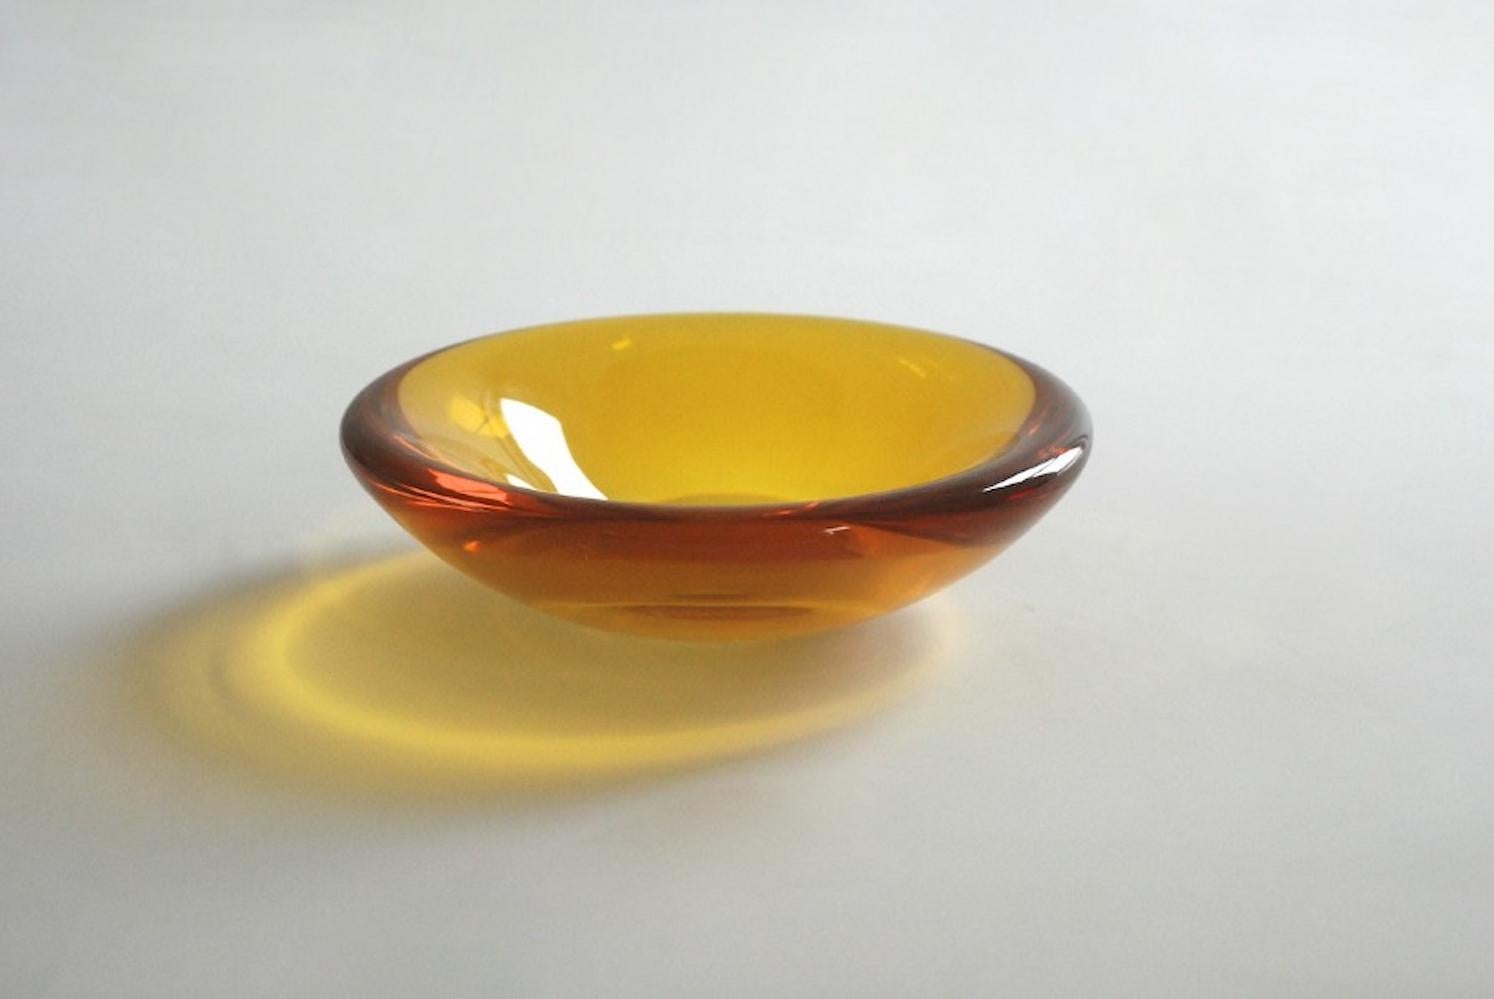 Epoxy guru Vincent de Rijk has made lustrous, shallow-bowls in a range of hypnotising colours and opacities. It's the perfect bowl to keep all life necessities.This Liquidish is aptly named honey, as it appears to be made of a solid version of the